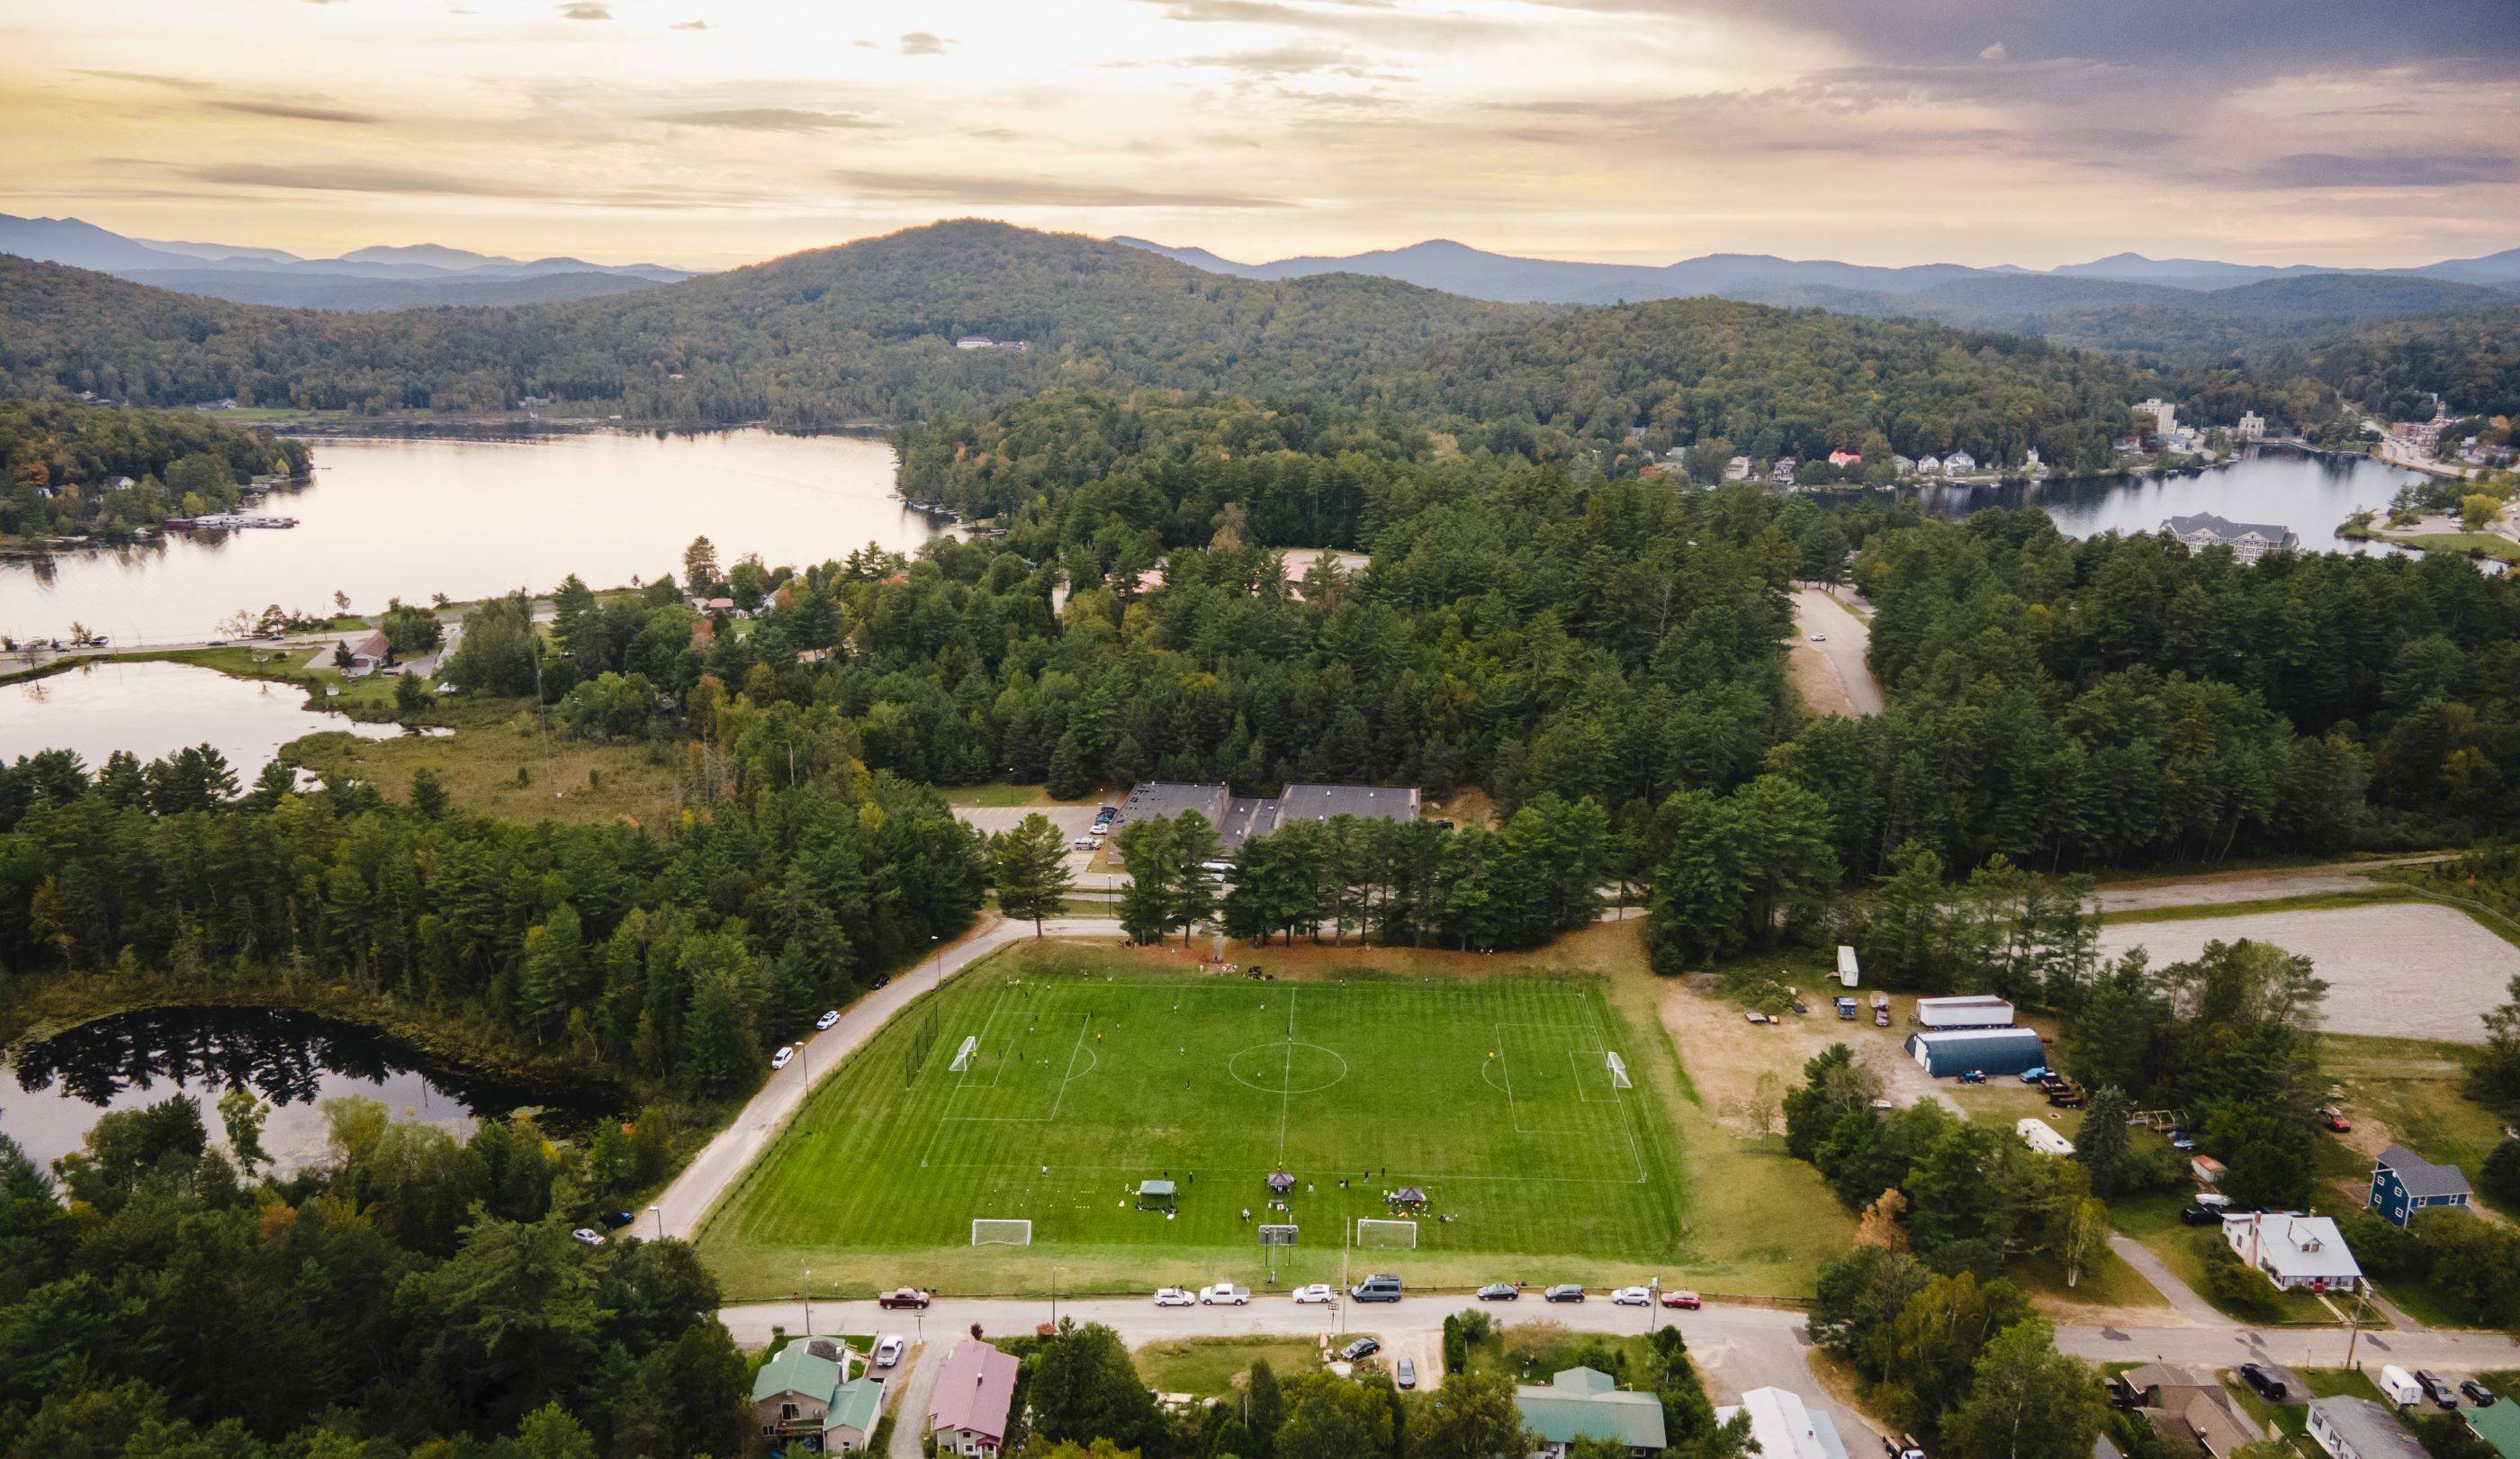 The college's soccer field, against a back drop of lakes and mountains